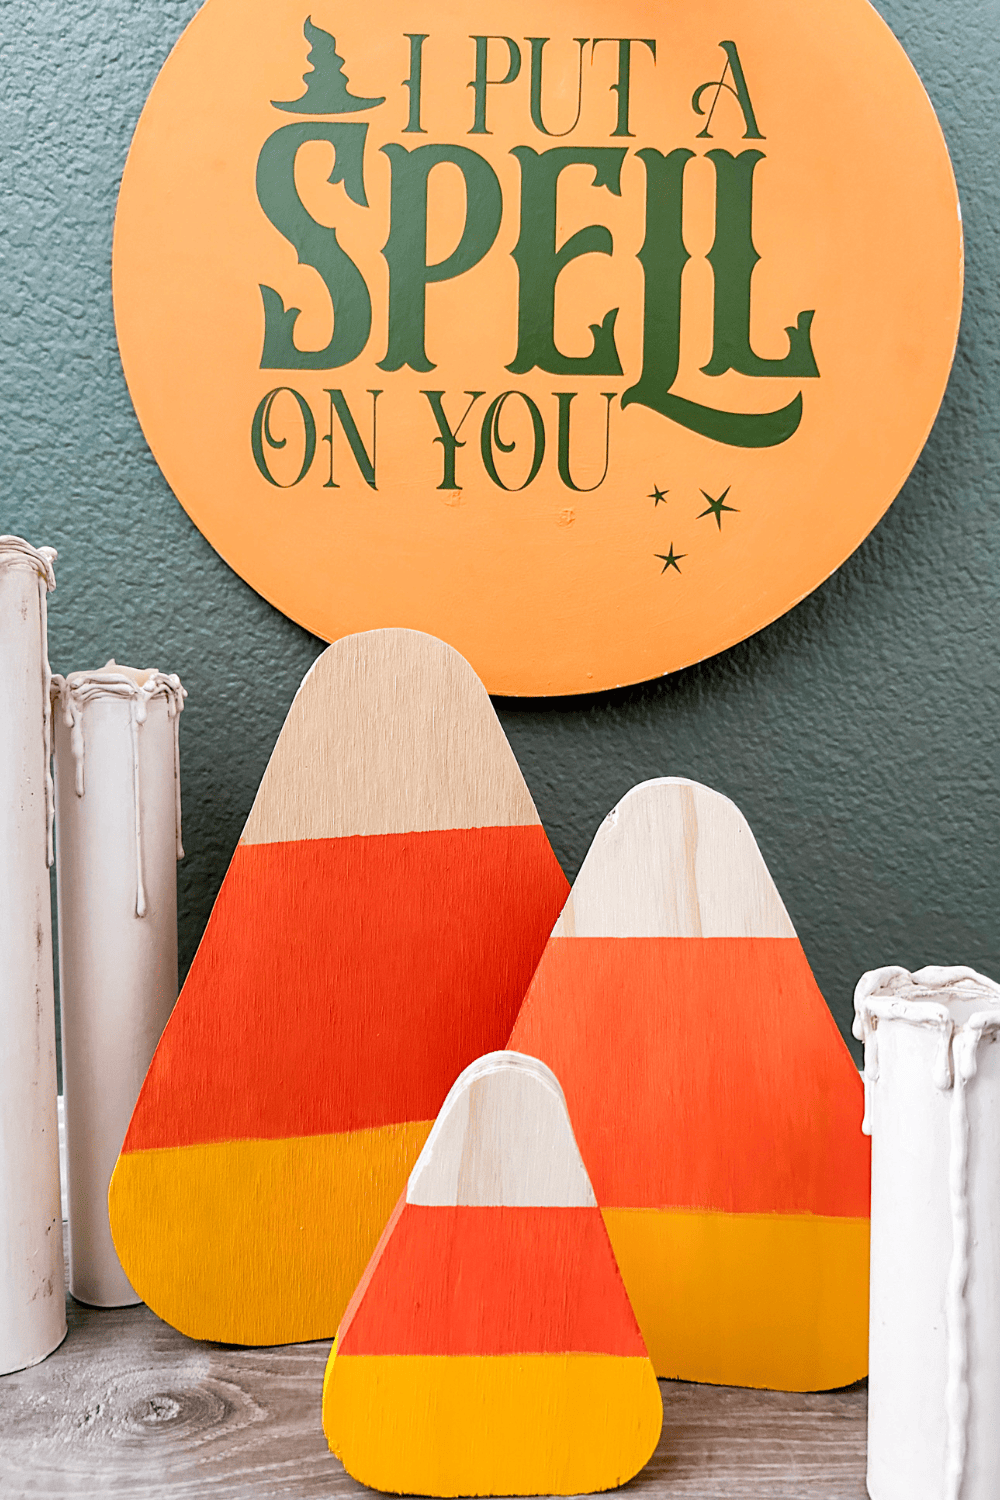 3 wooden candy corn with dripping candles on either side in front of a green wall with a picture that says 'I put a spell on you' hanging on it.